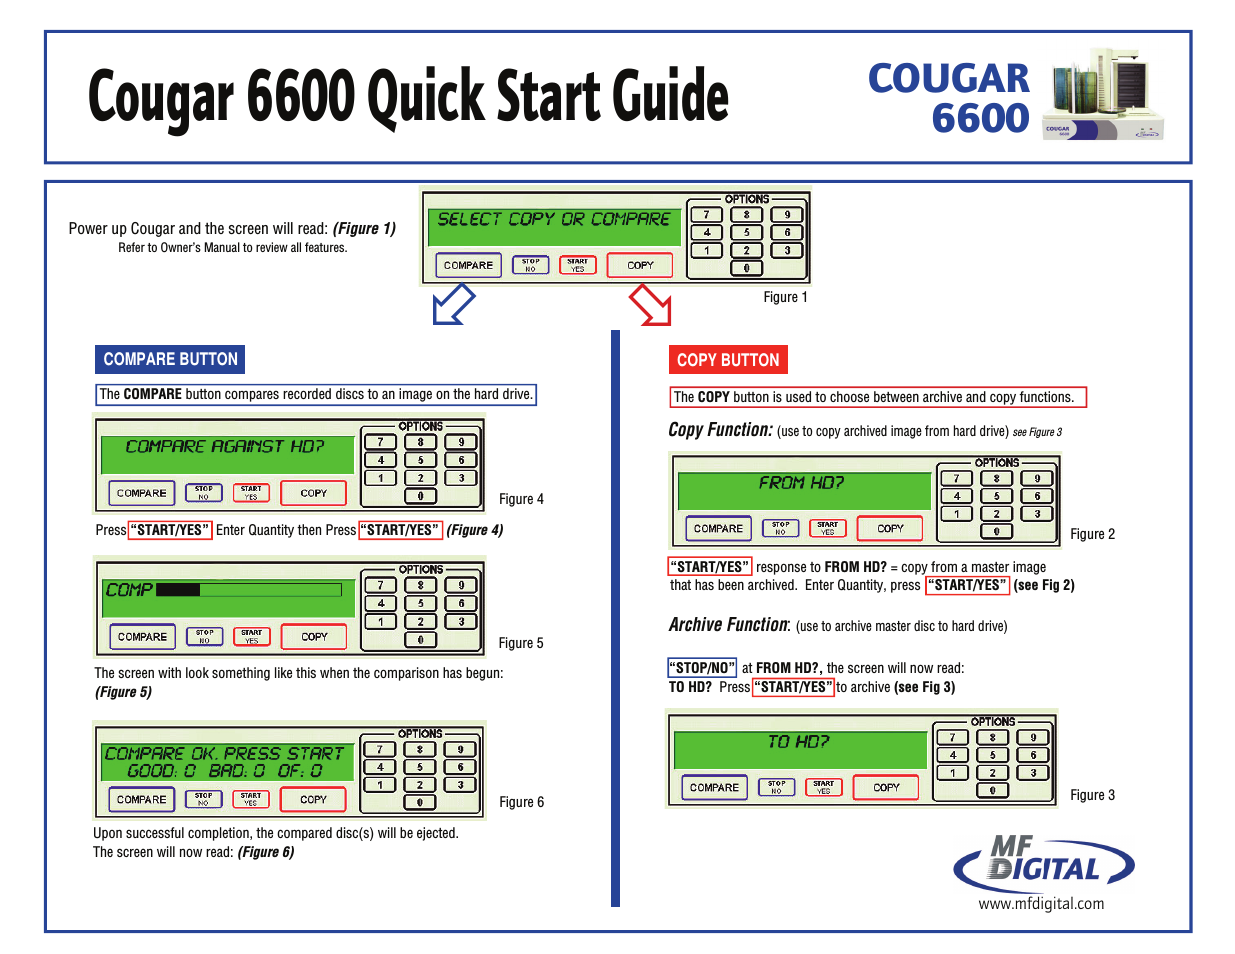 Cougar 6600 Quick Start Guide